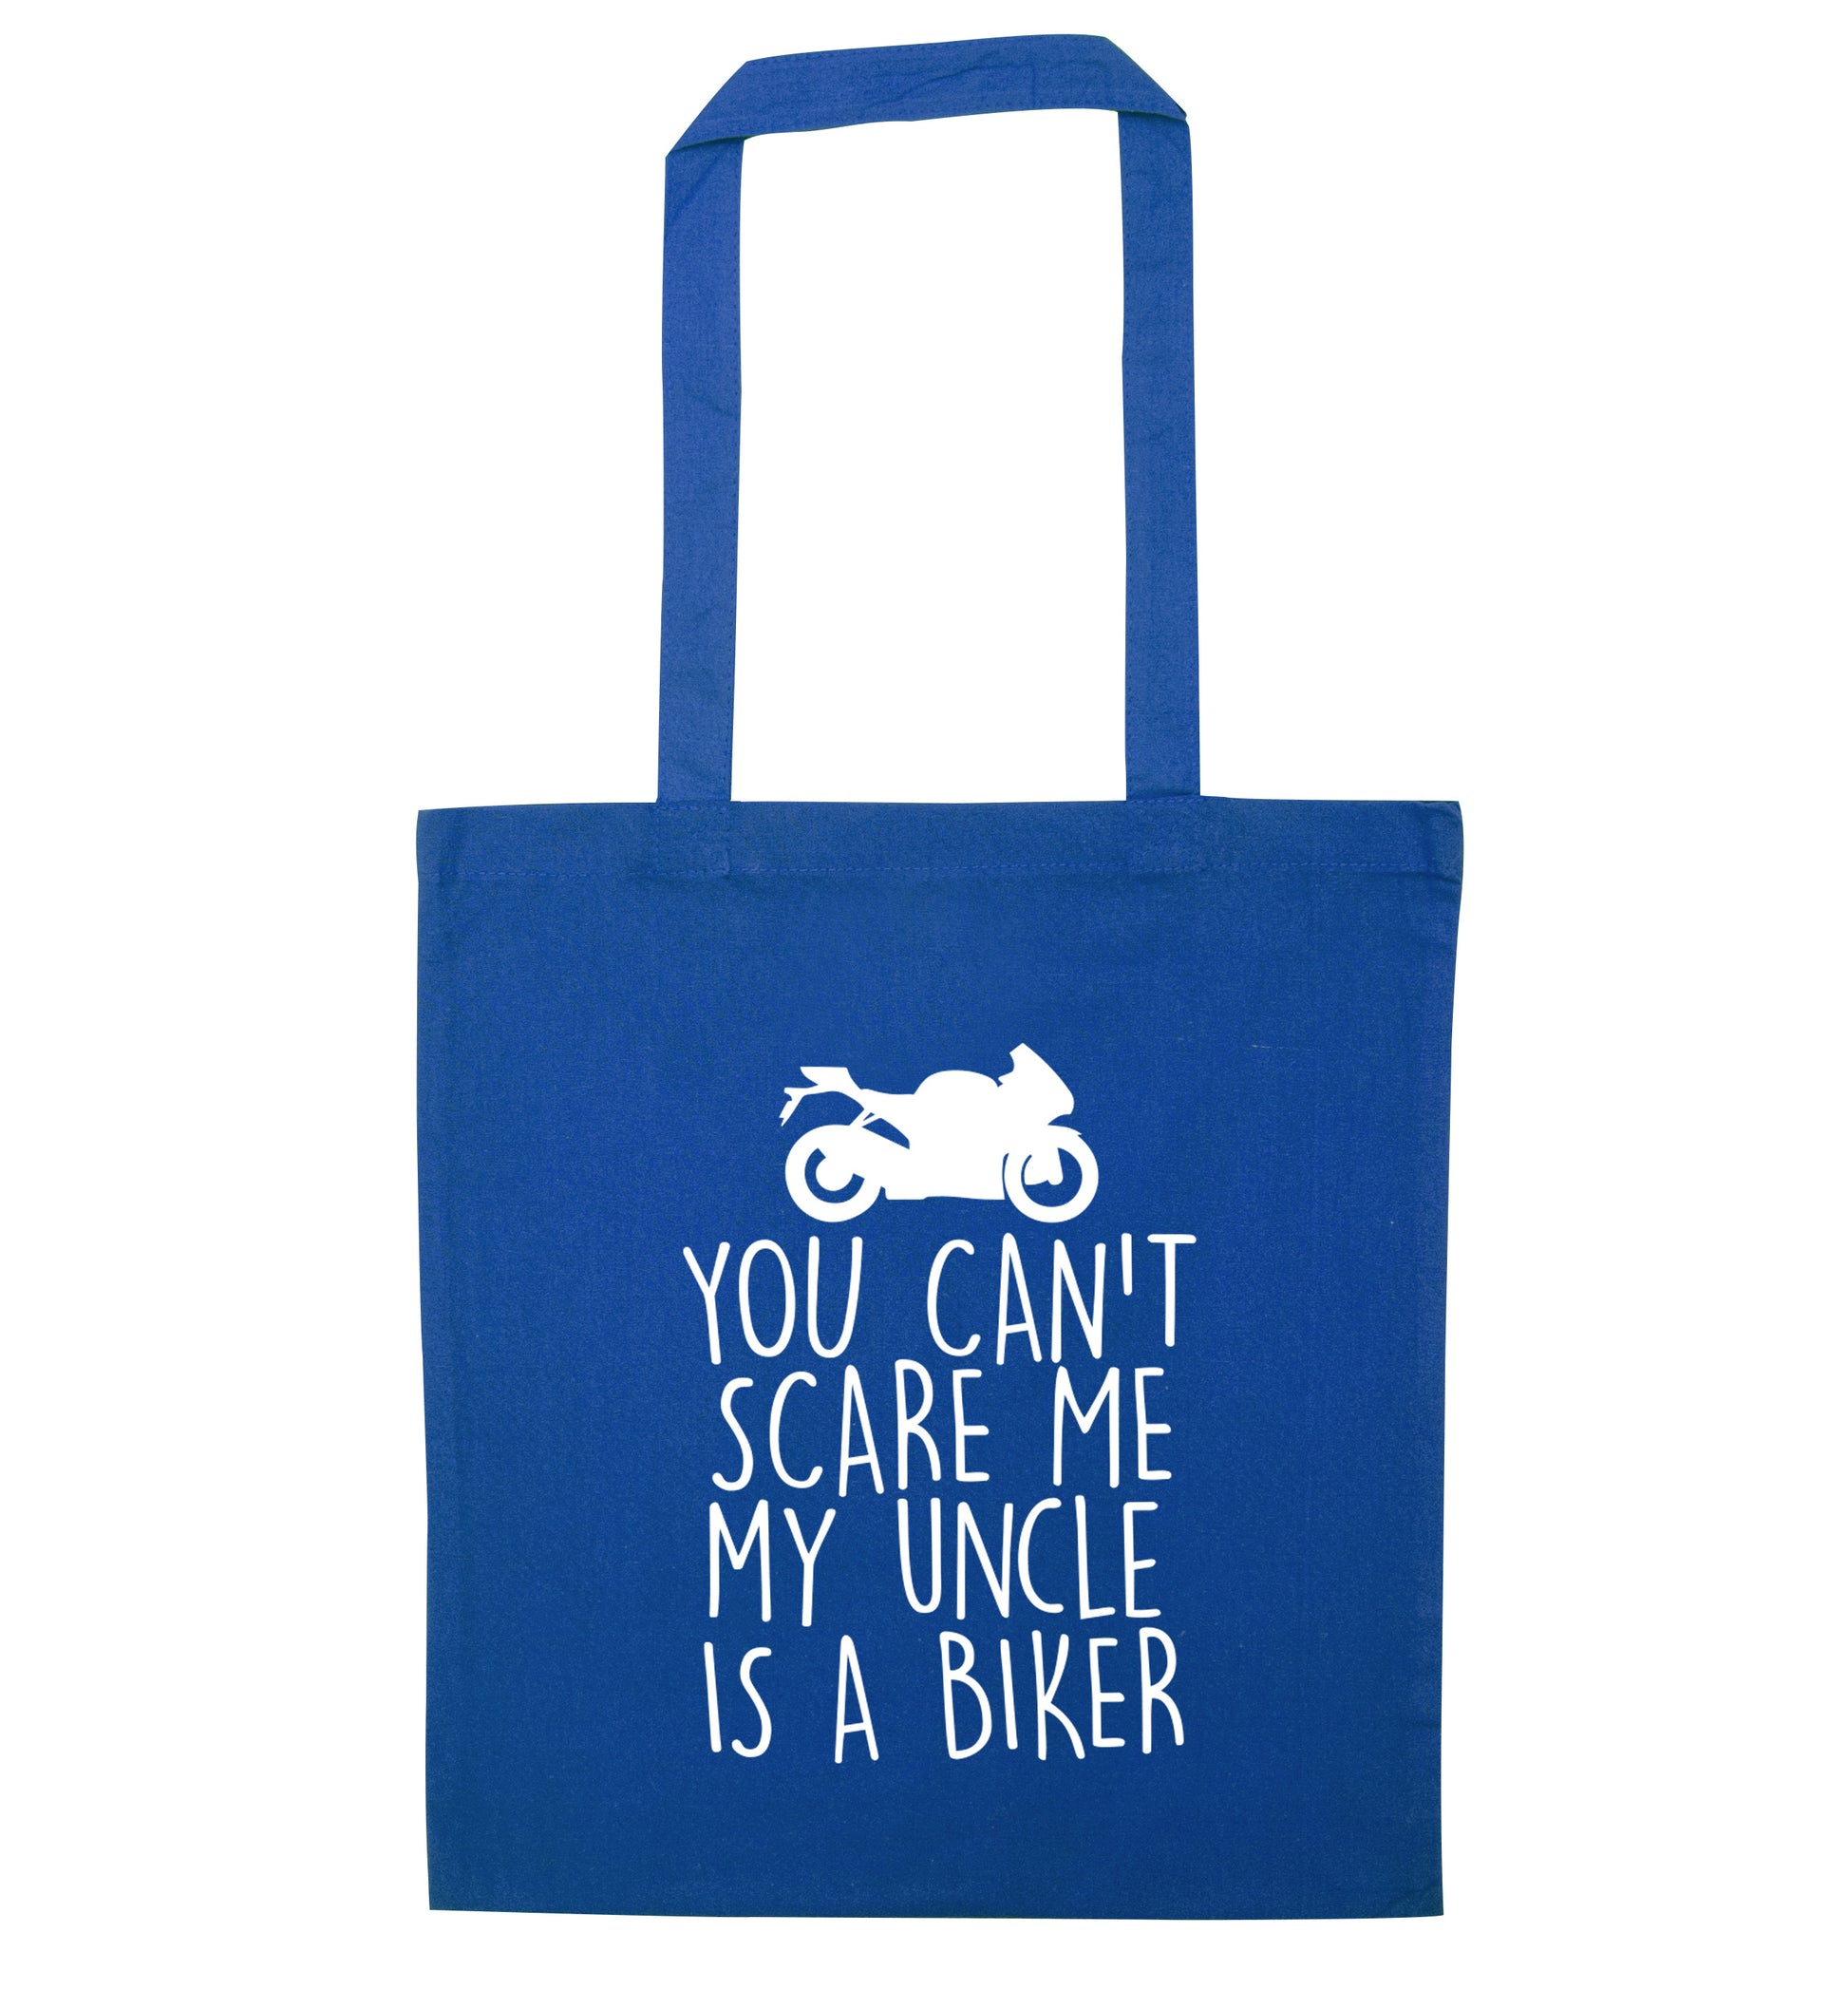 You can't scare me my uncle is a biker blue tote bag